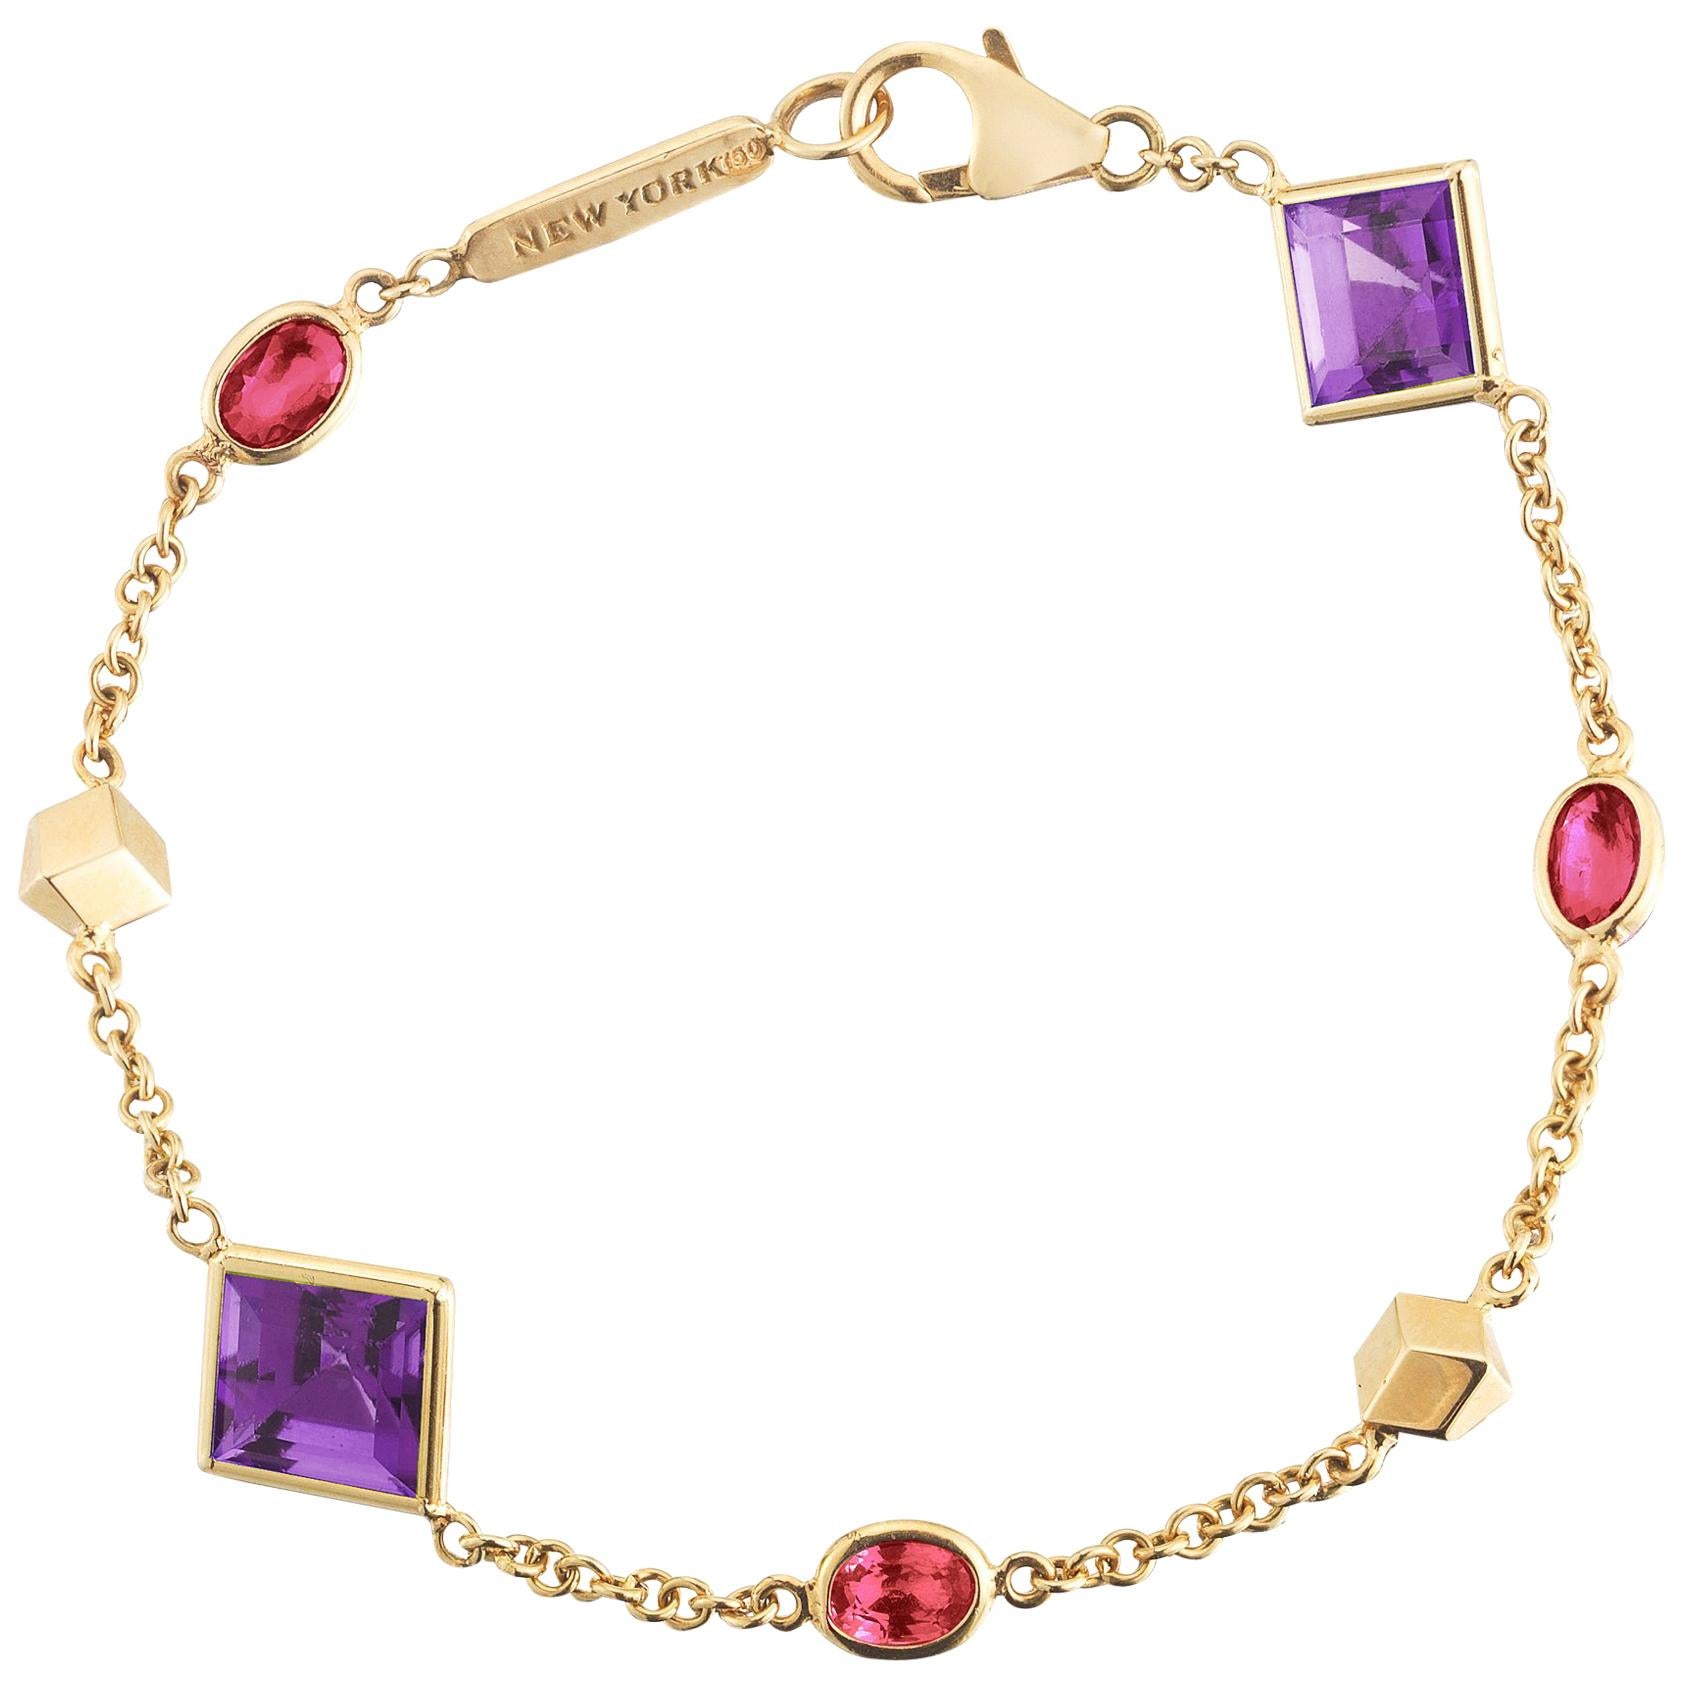 Paolo Costagli 18 Karat Yellow Gold Florentine Bracelet with Amethyst and Rubies For Sale